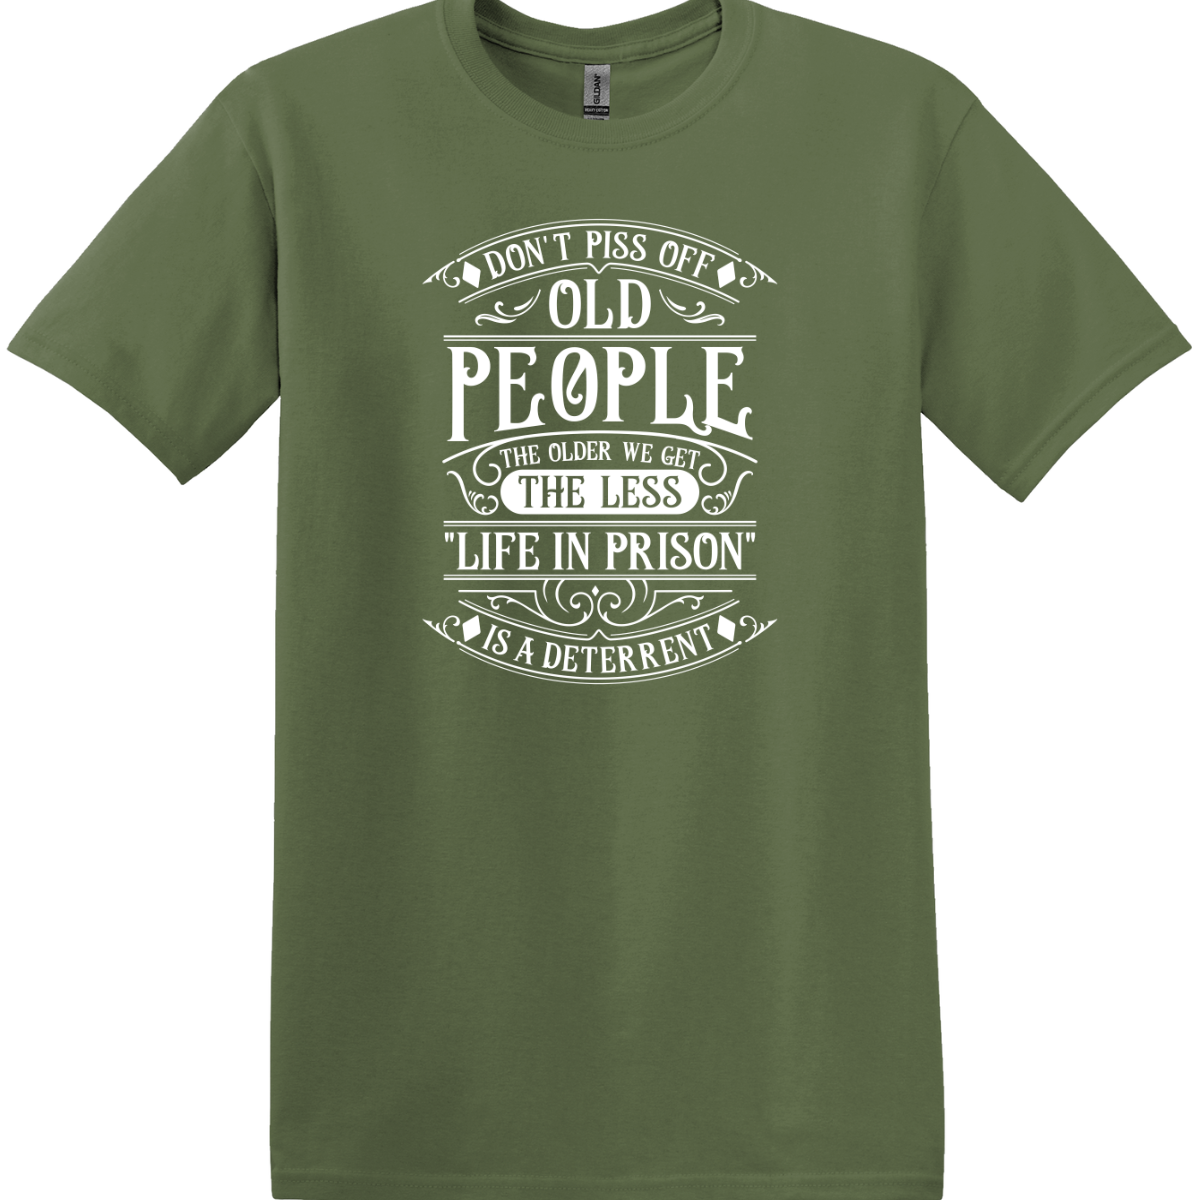 Don't Piss Off Old People Tee